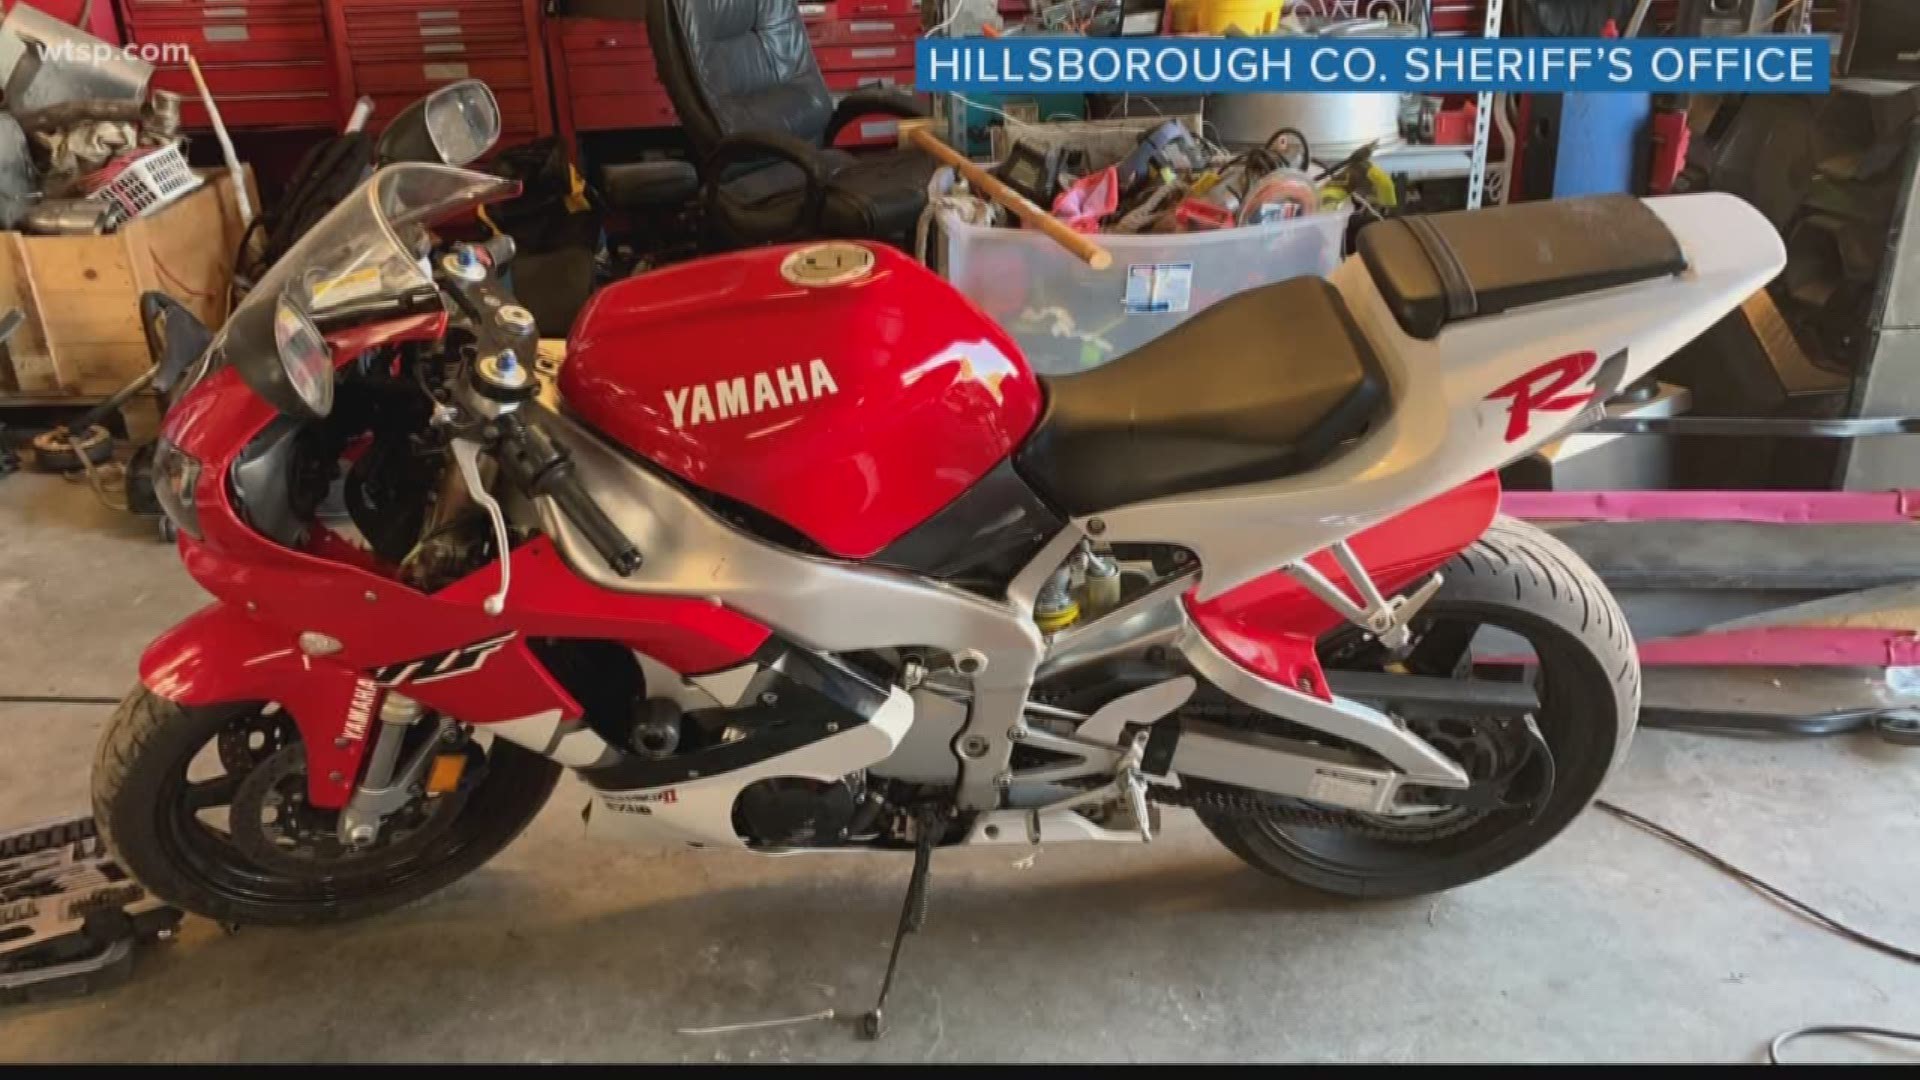 Hillsborough County Sheriff's deputies are still trying to track down the owners of the motorcycles, cars and parts.